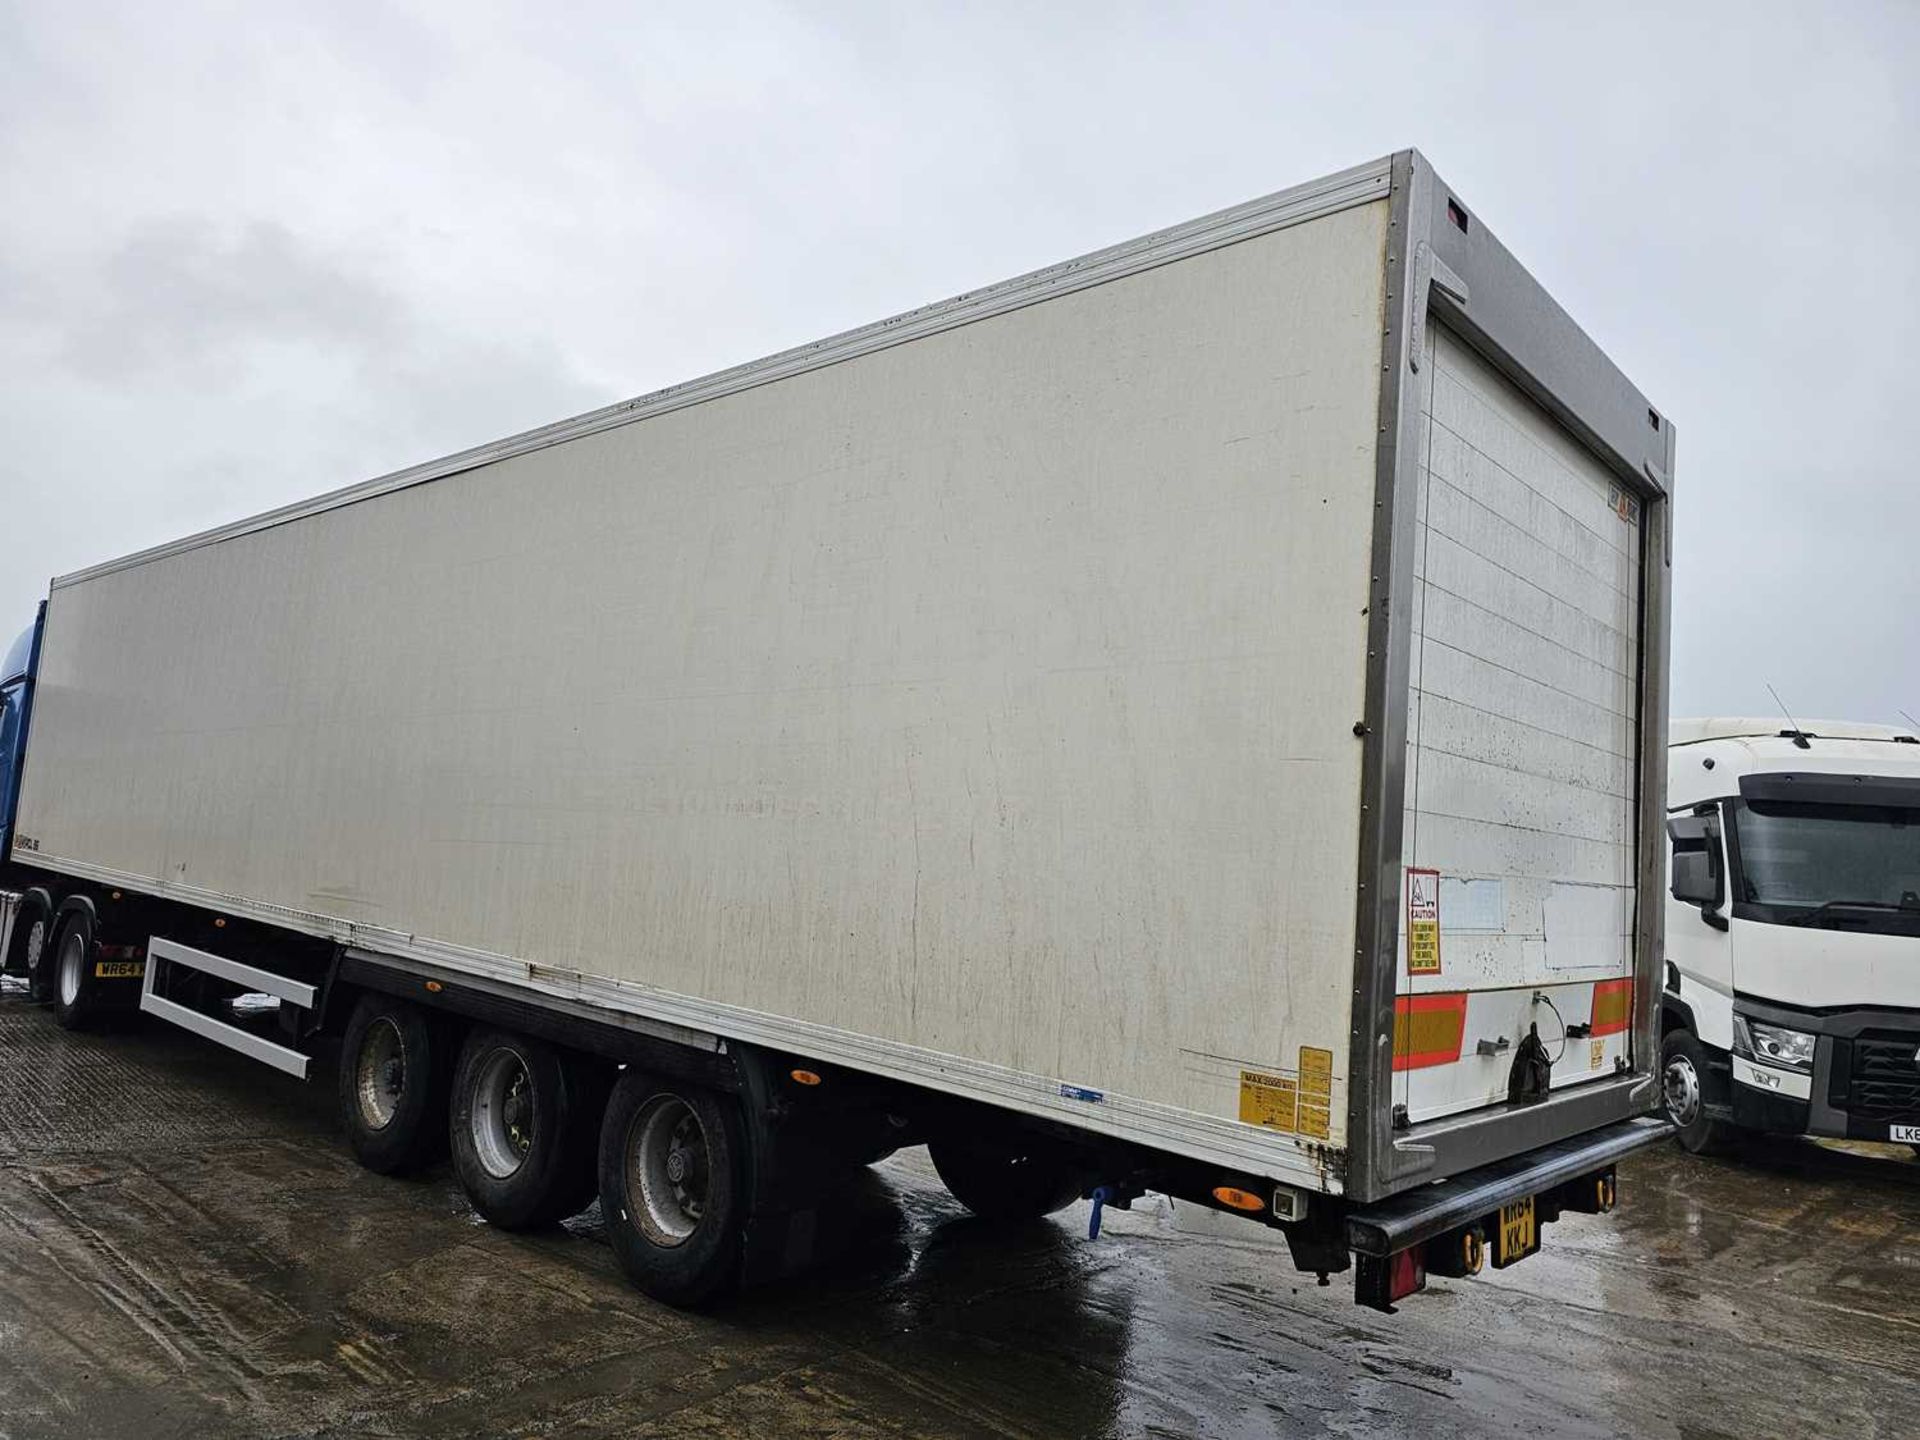 2010 Gray & Adams Tri Axle Refrigeration Trailer (No Fridge), (Plating Certificate Available) - Image 2 of 12